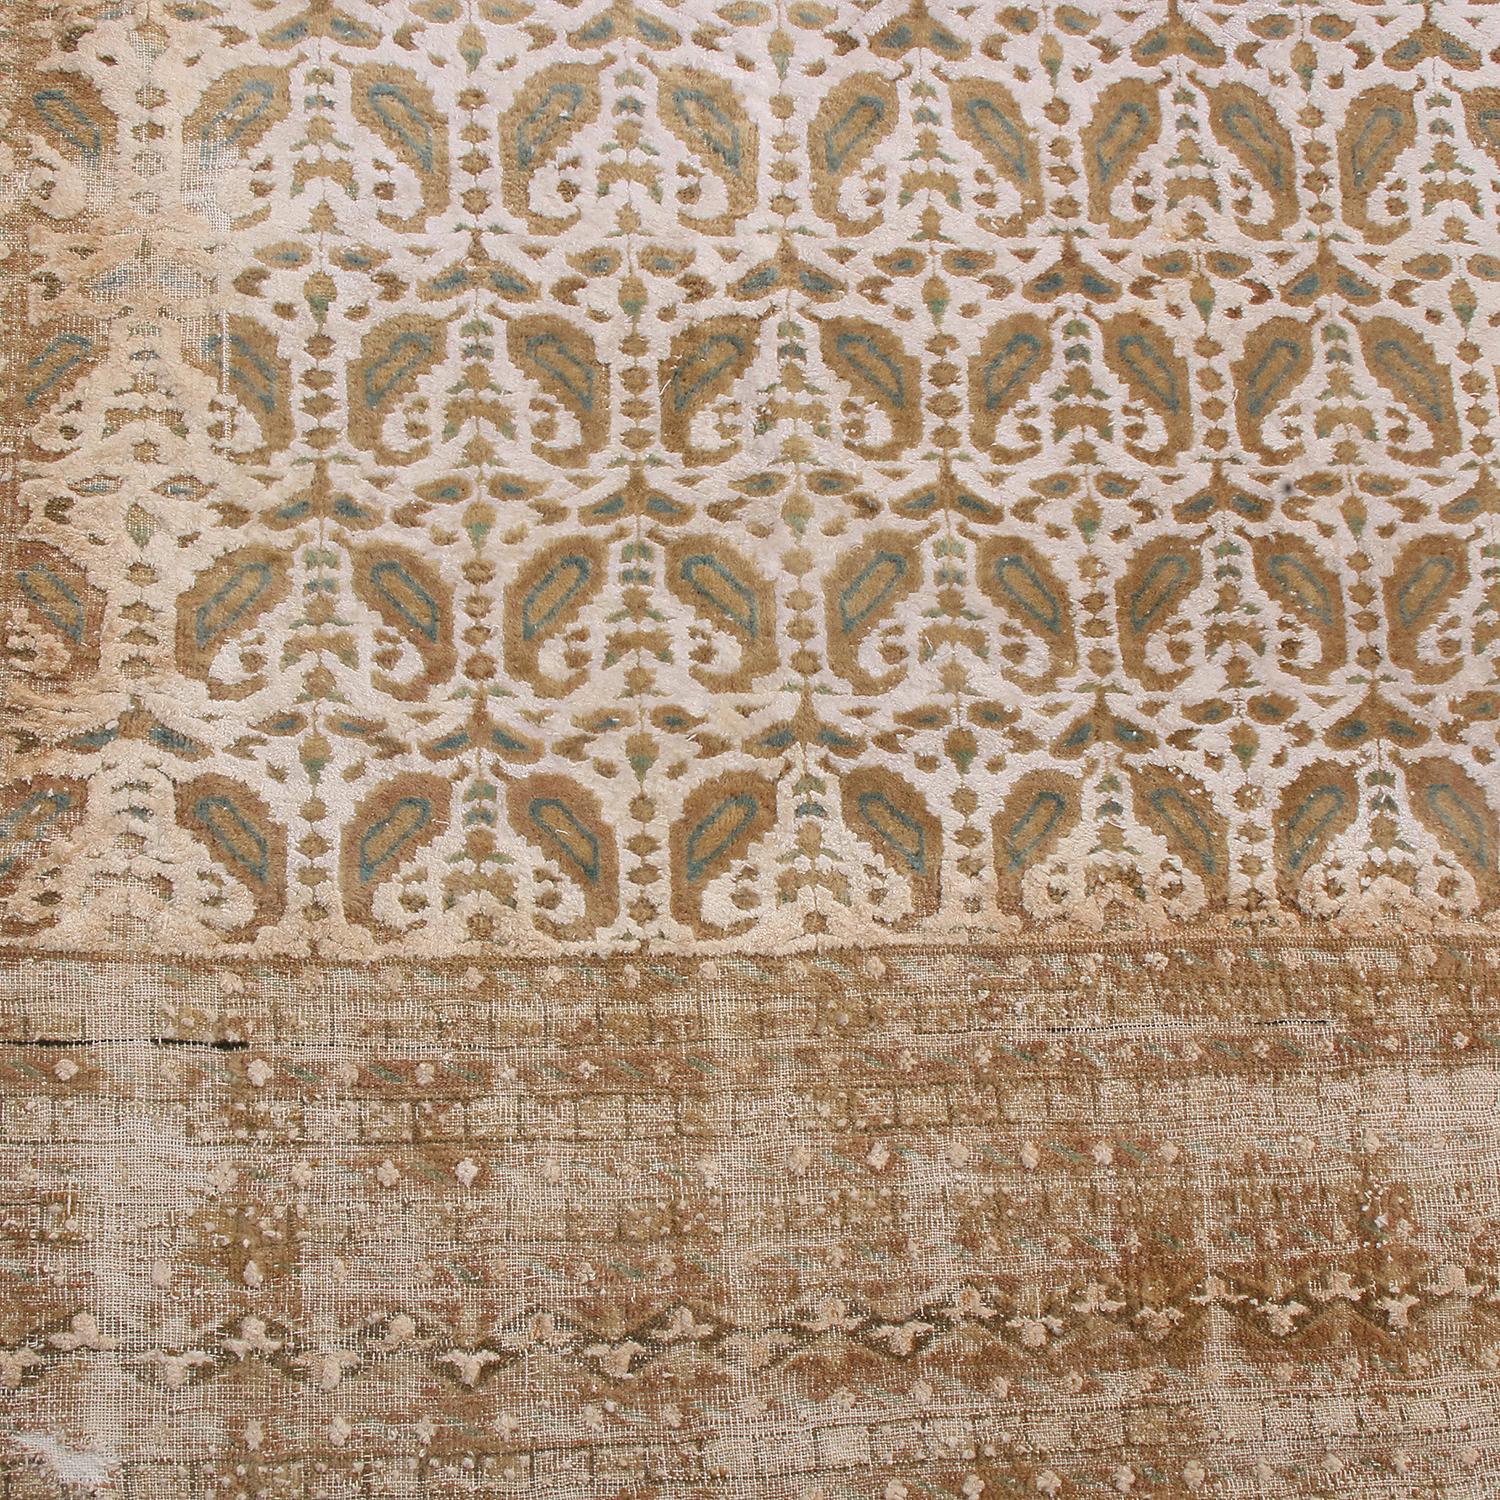 Antique Boteh Paisley Beige and Off-White Wool Rug by Rug & Kilim In Good Condition For Sale In Long Island City, NY